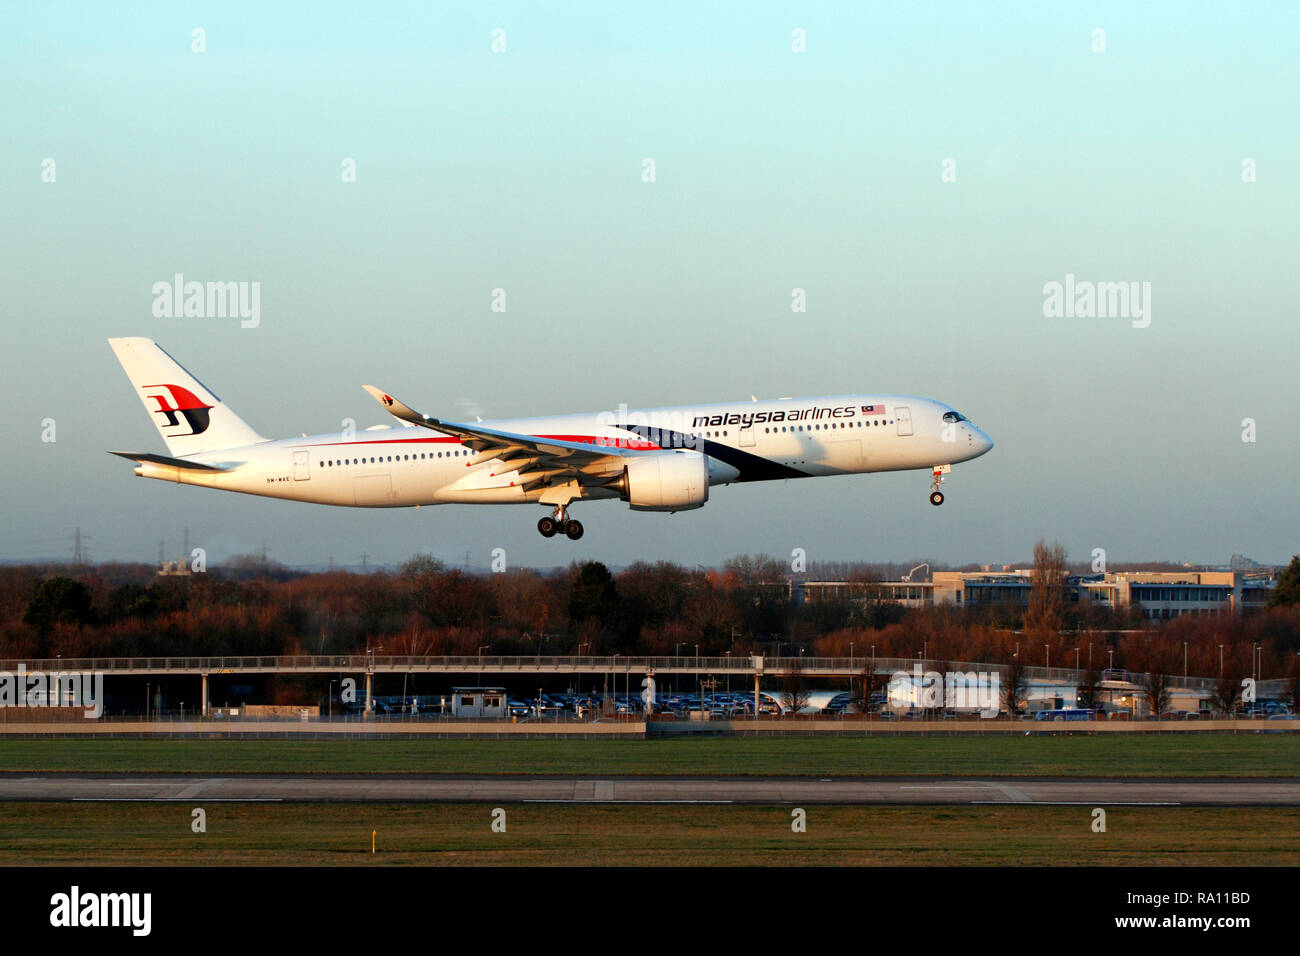 Malaysia Airlines Airbus A350-900, 9M-MAE in atterraggio a Heathrow airport, Londra UK. Foto Stock